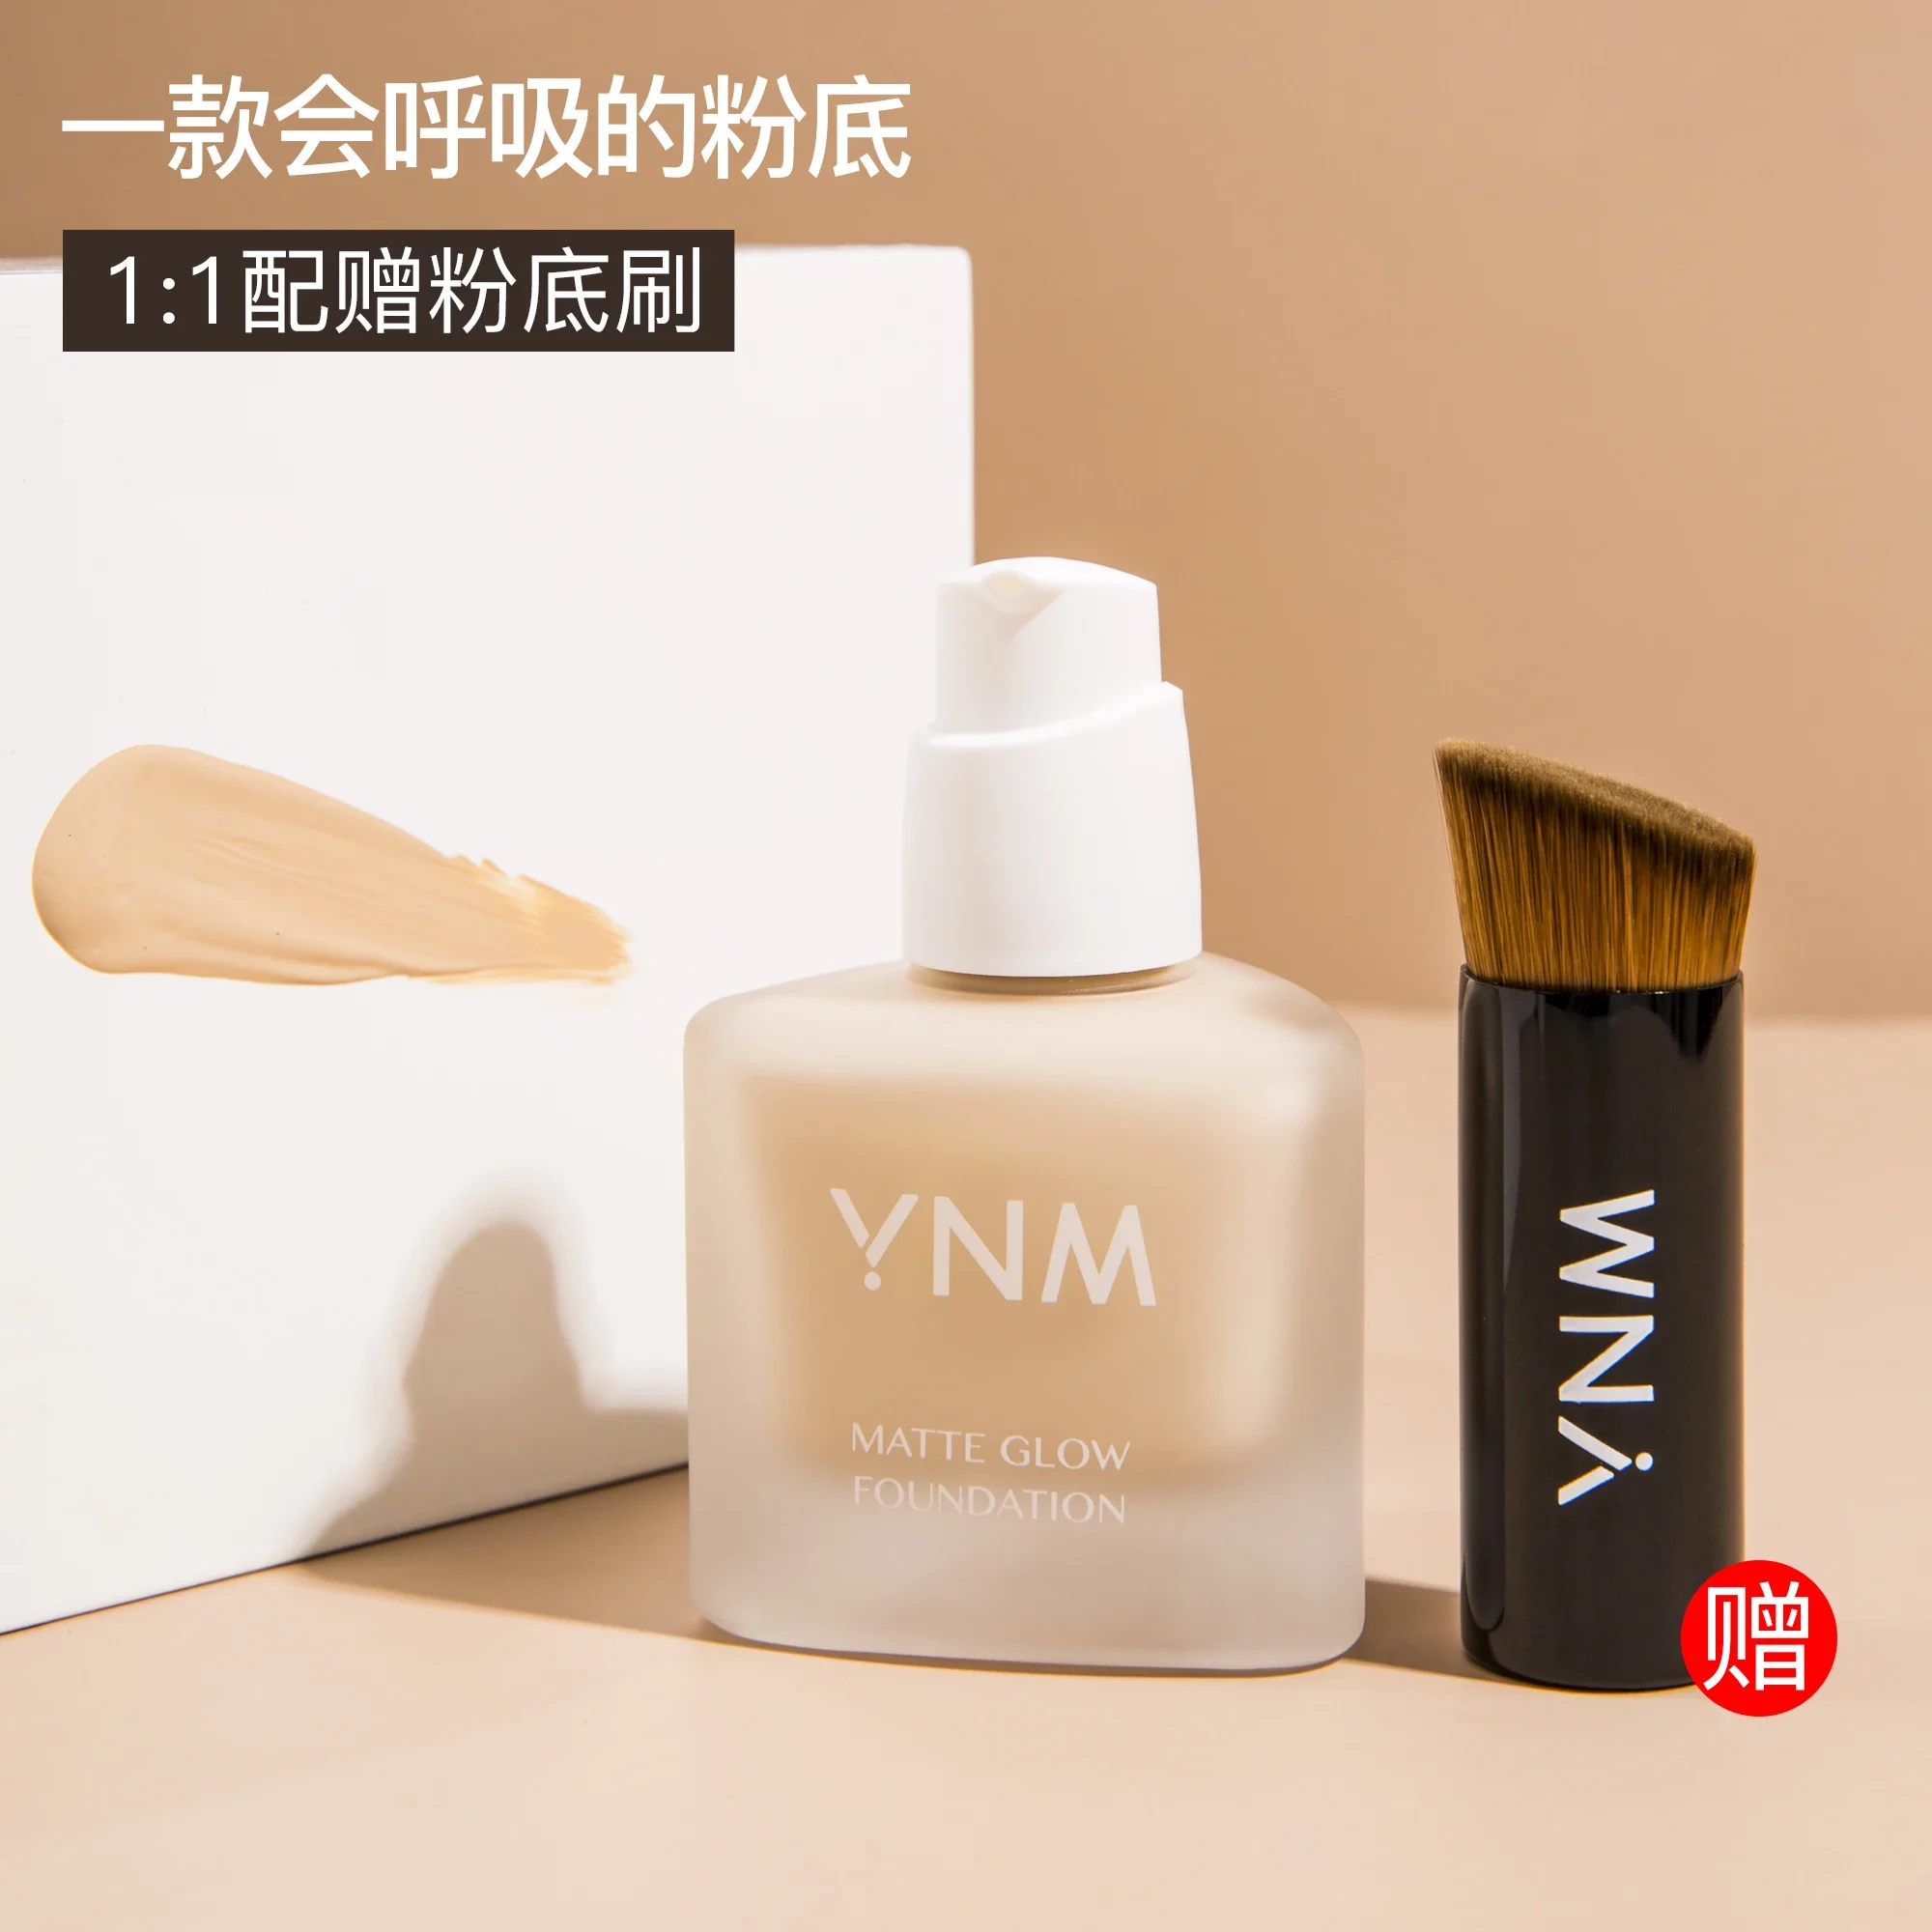 Ynm Liquid Foundation Concealer and Moisturizer Long Lasting Oil Control Li Jiaqi Recommended Dry Skin Soft Mist Makeup Skin Care Astaxanthin